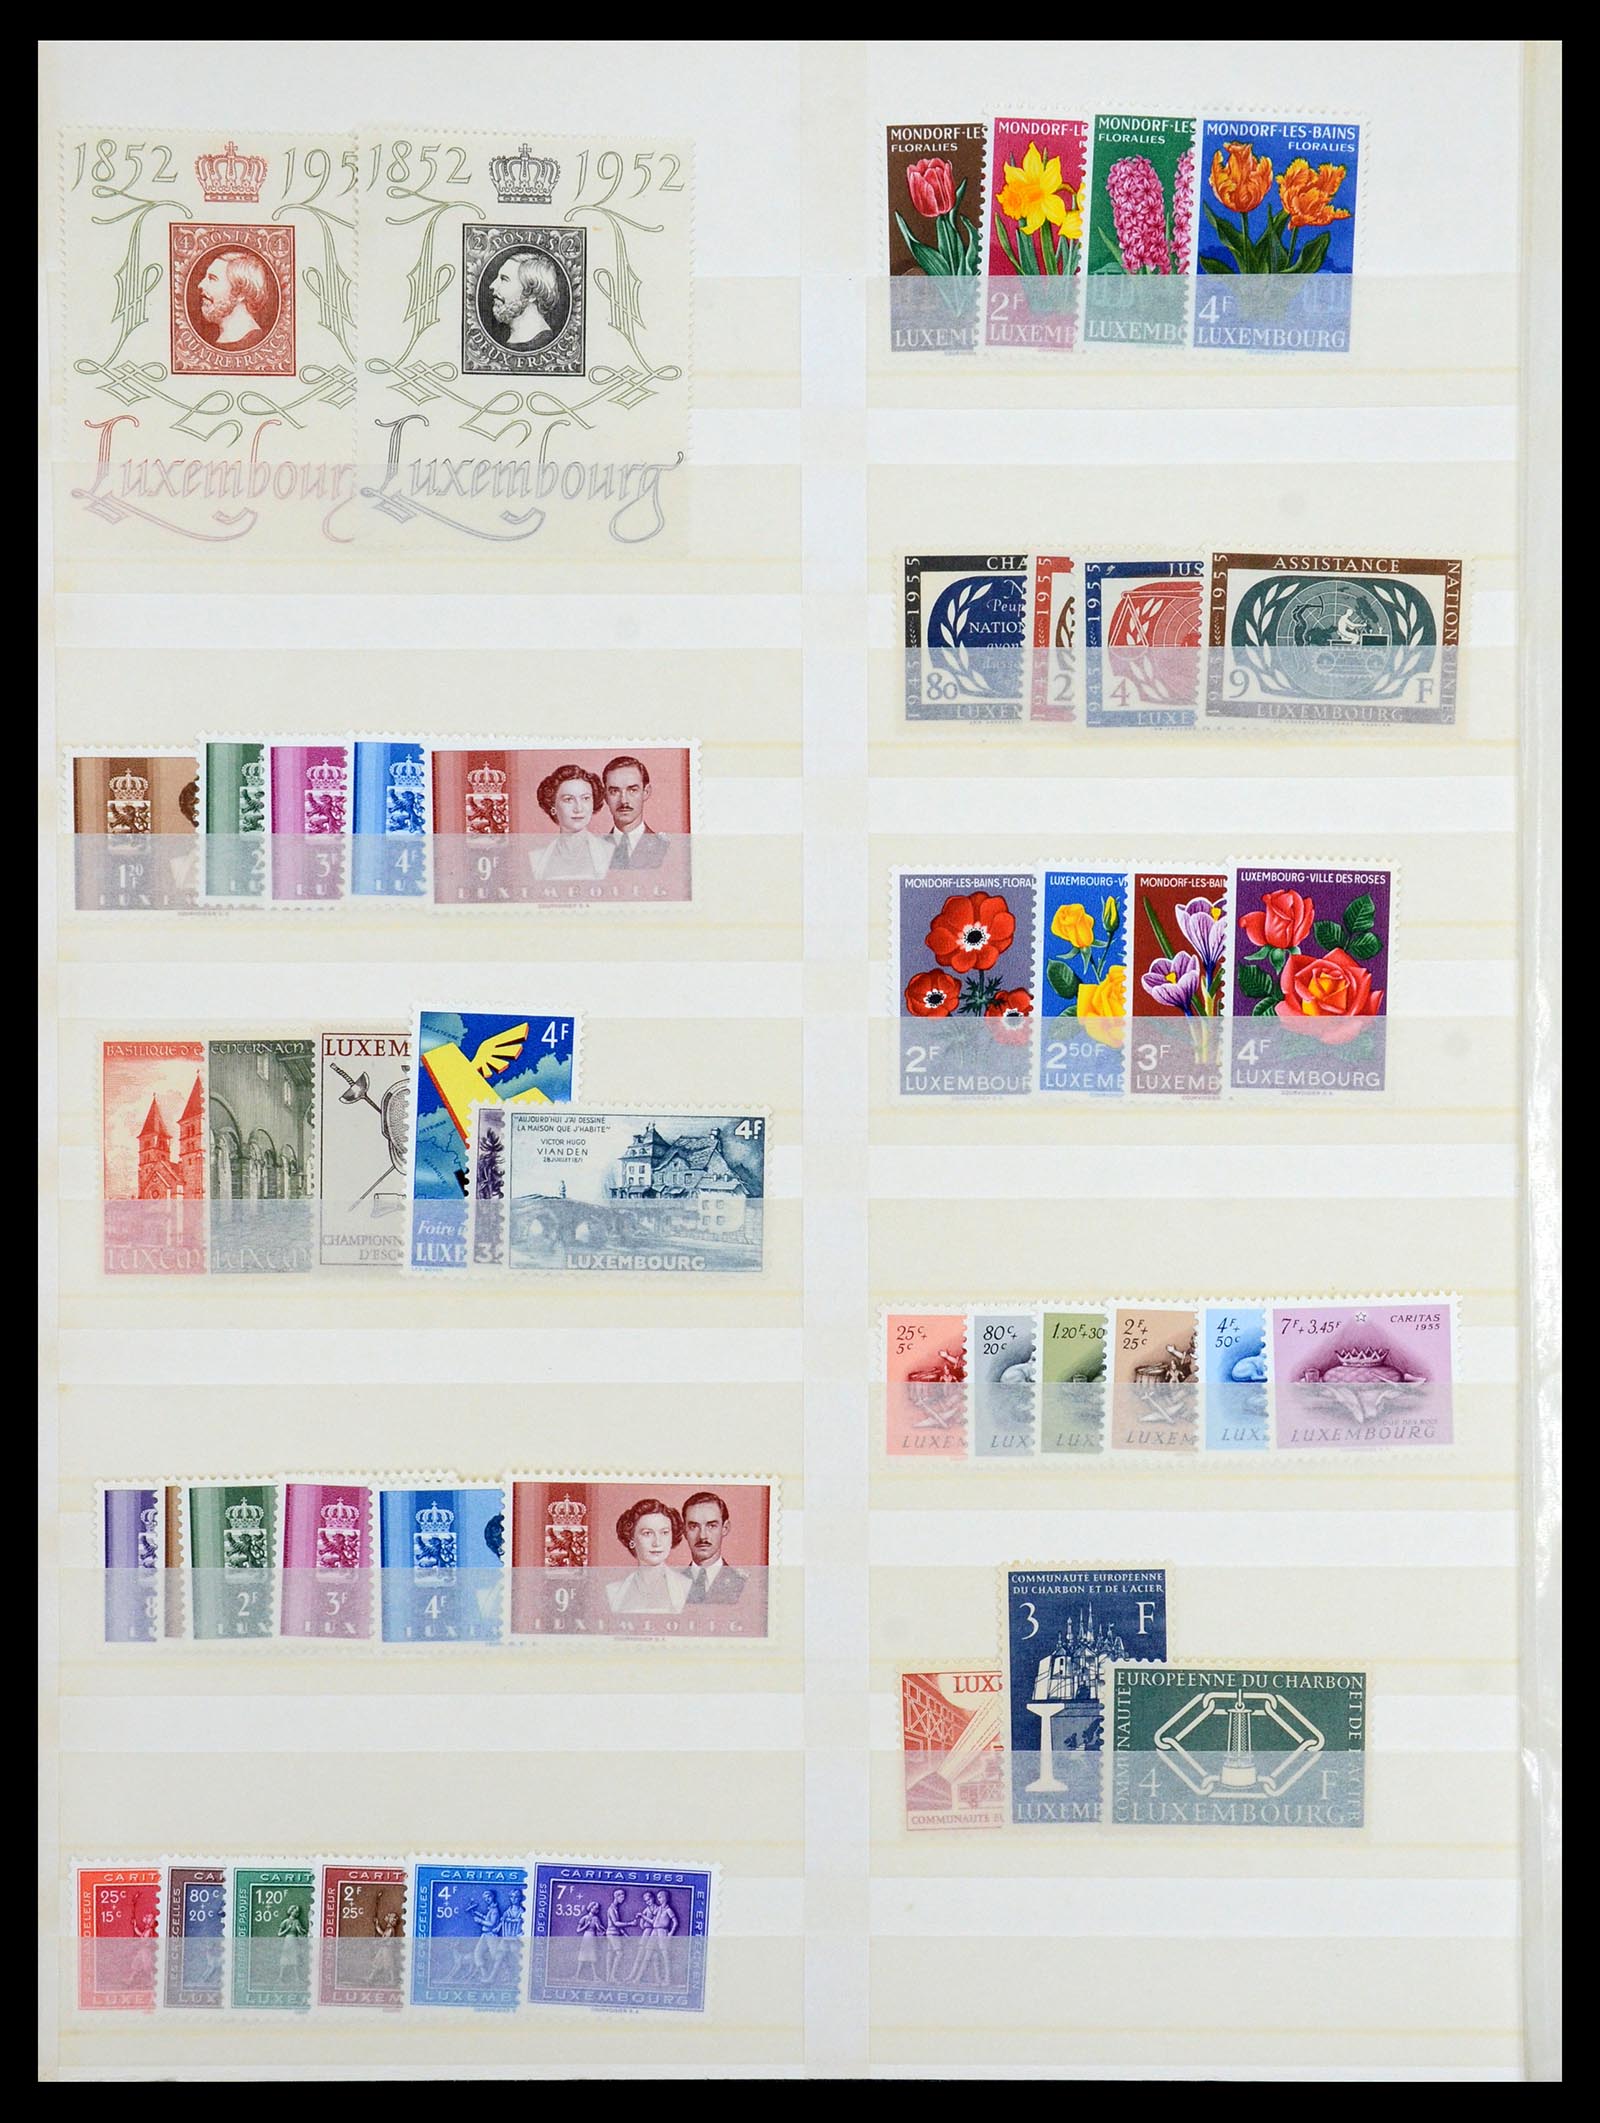 35165 010 - Stamp Collection 35165 Switzerland and Luxembourg key stamps.